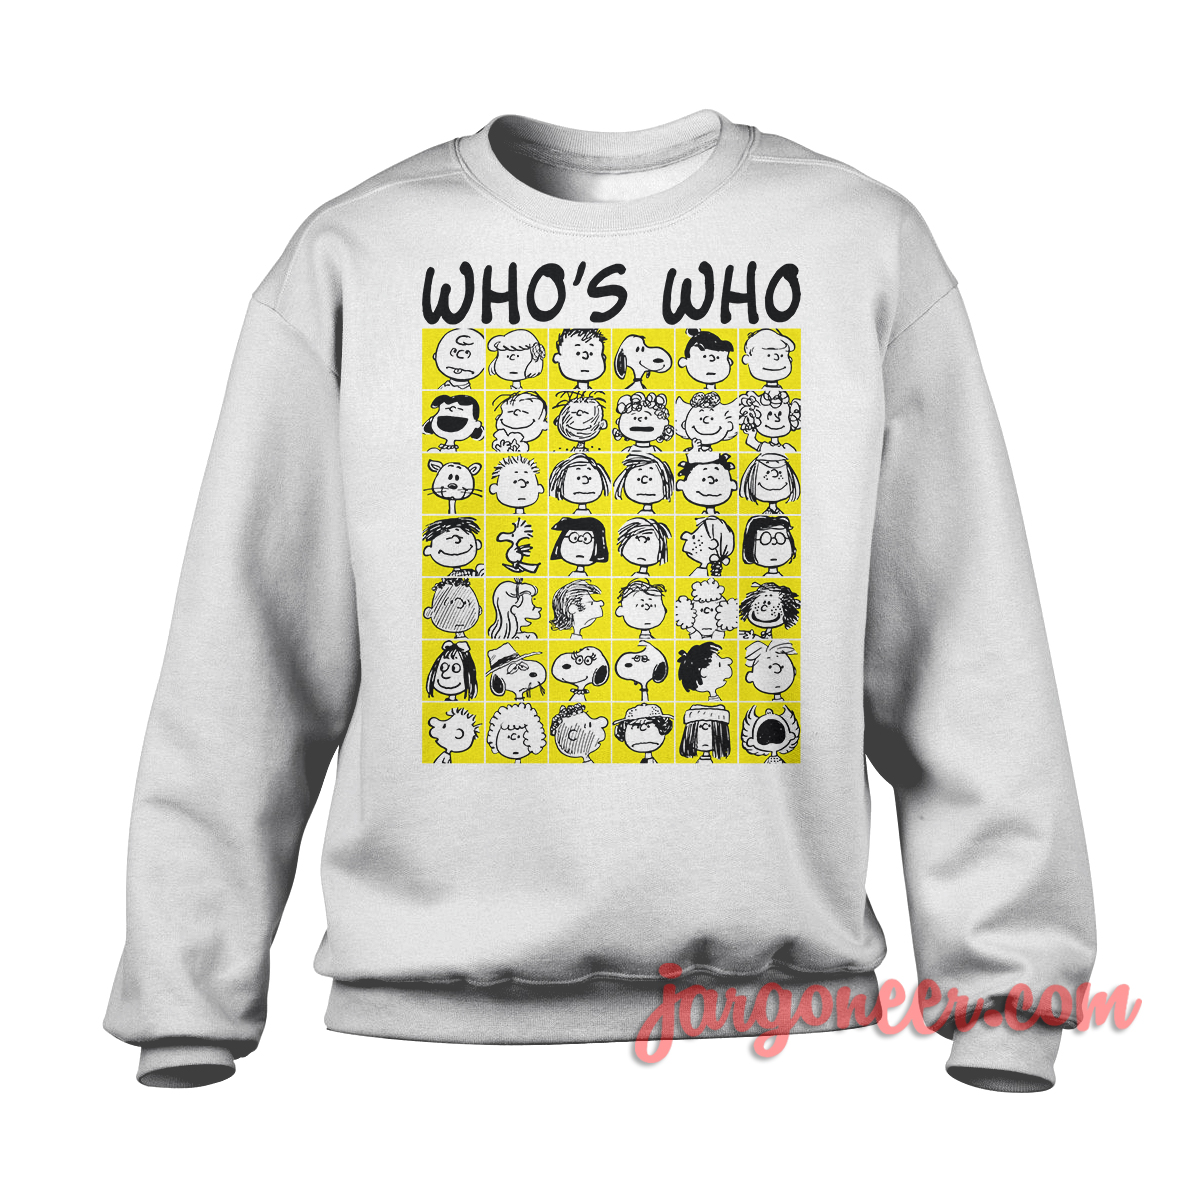 The Peanuts Whos Who White SS - Shop Unique Graphic Cool Shirt Designs